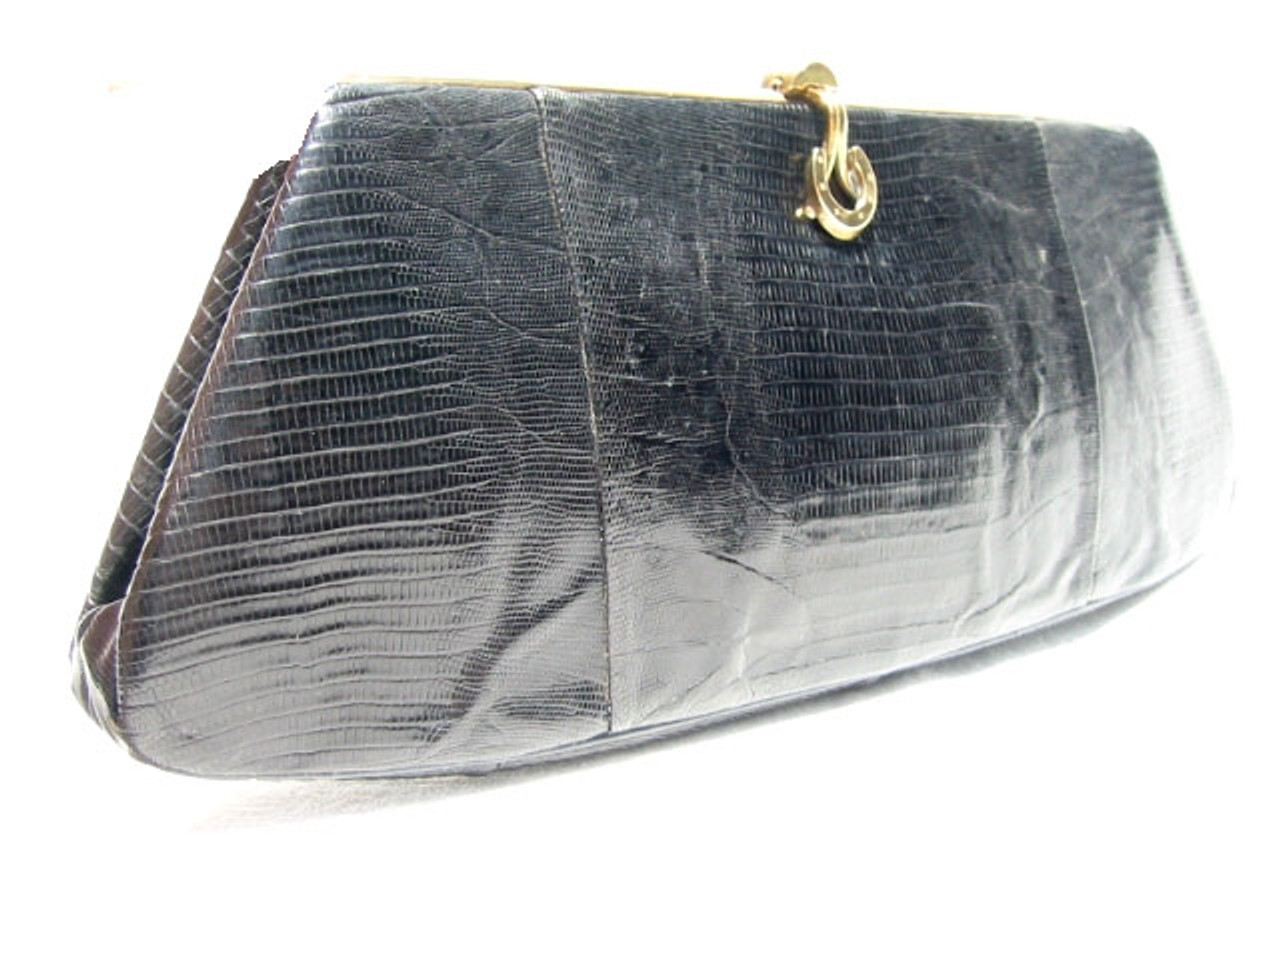 Gleaming Heart Shape Clutch Handbag in Silver - Retro, Indie and Unique  Fashion